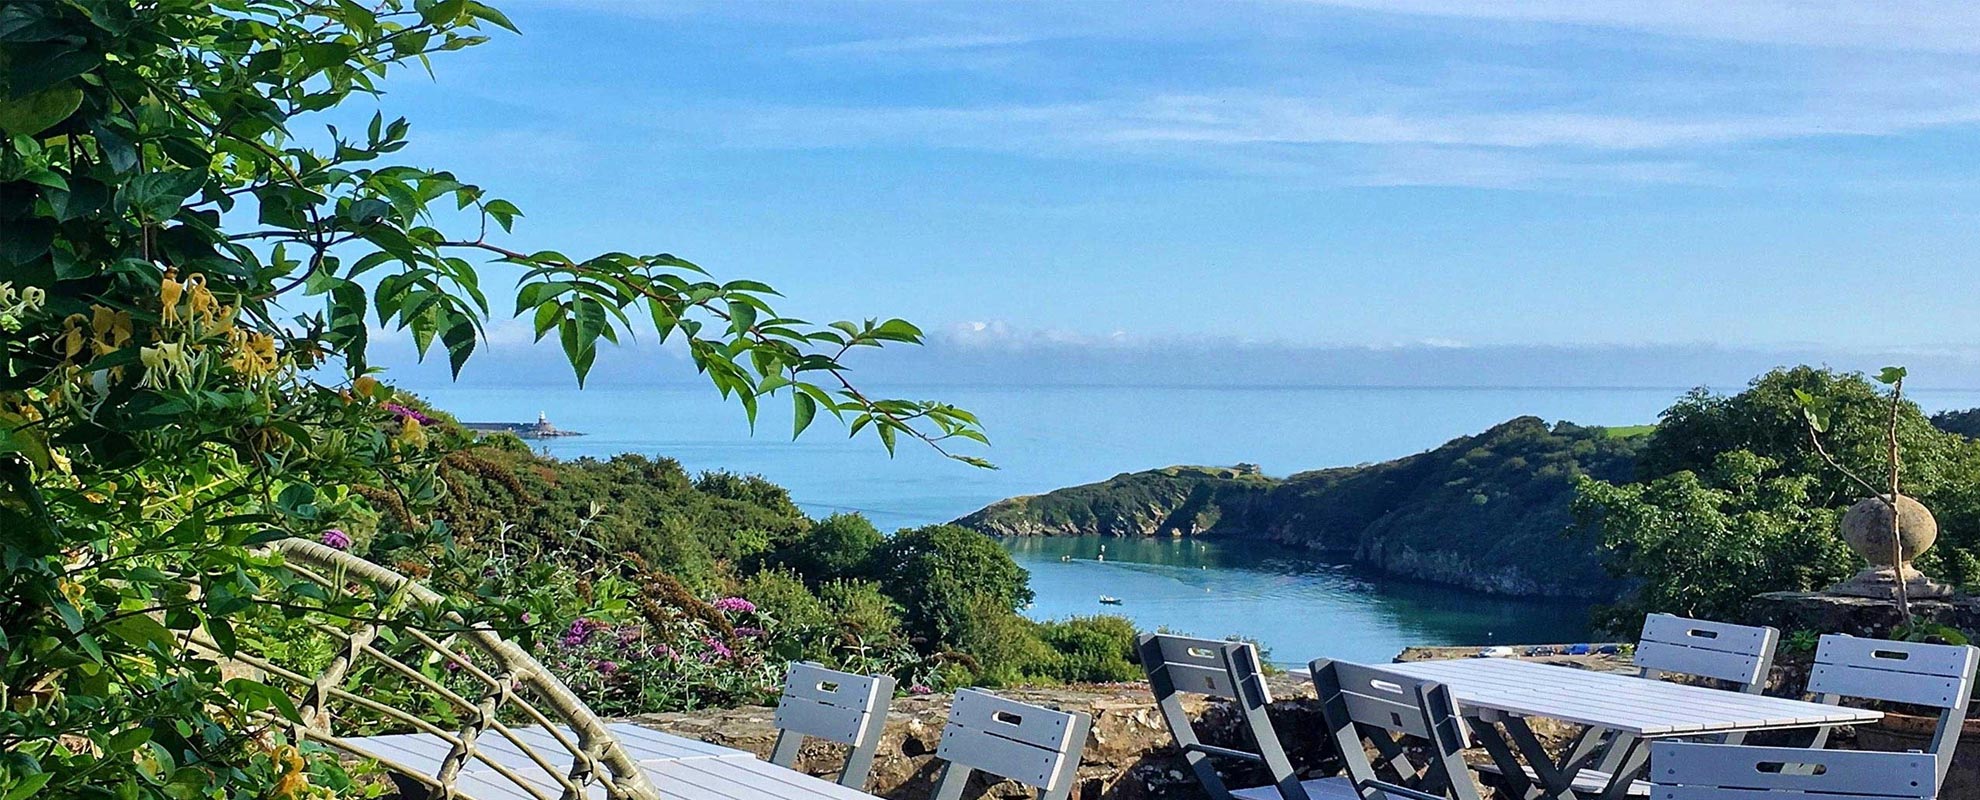 View over Fishguard Bay from the garden terrace